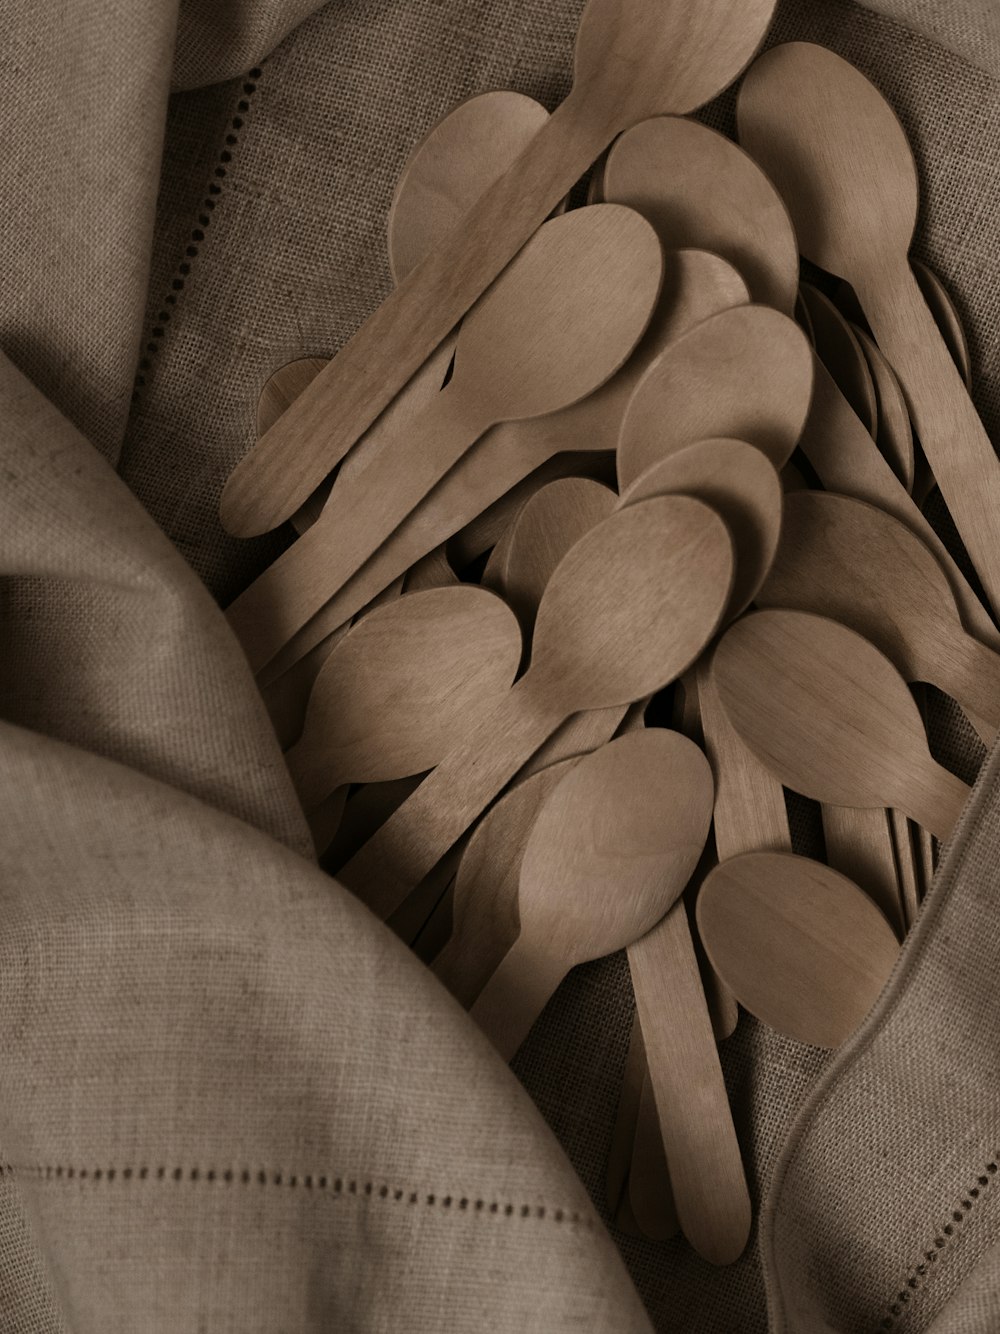 a pile of wooden spoons sitting on top of a cloth